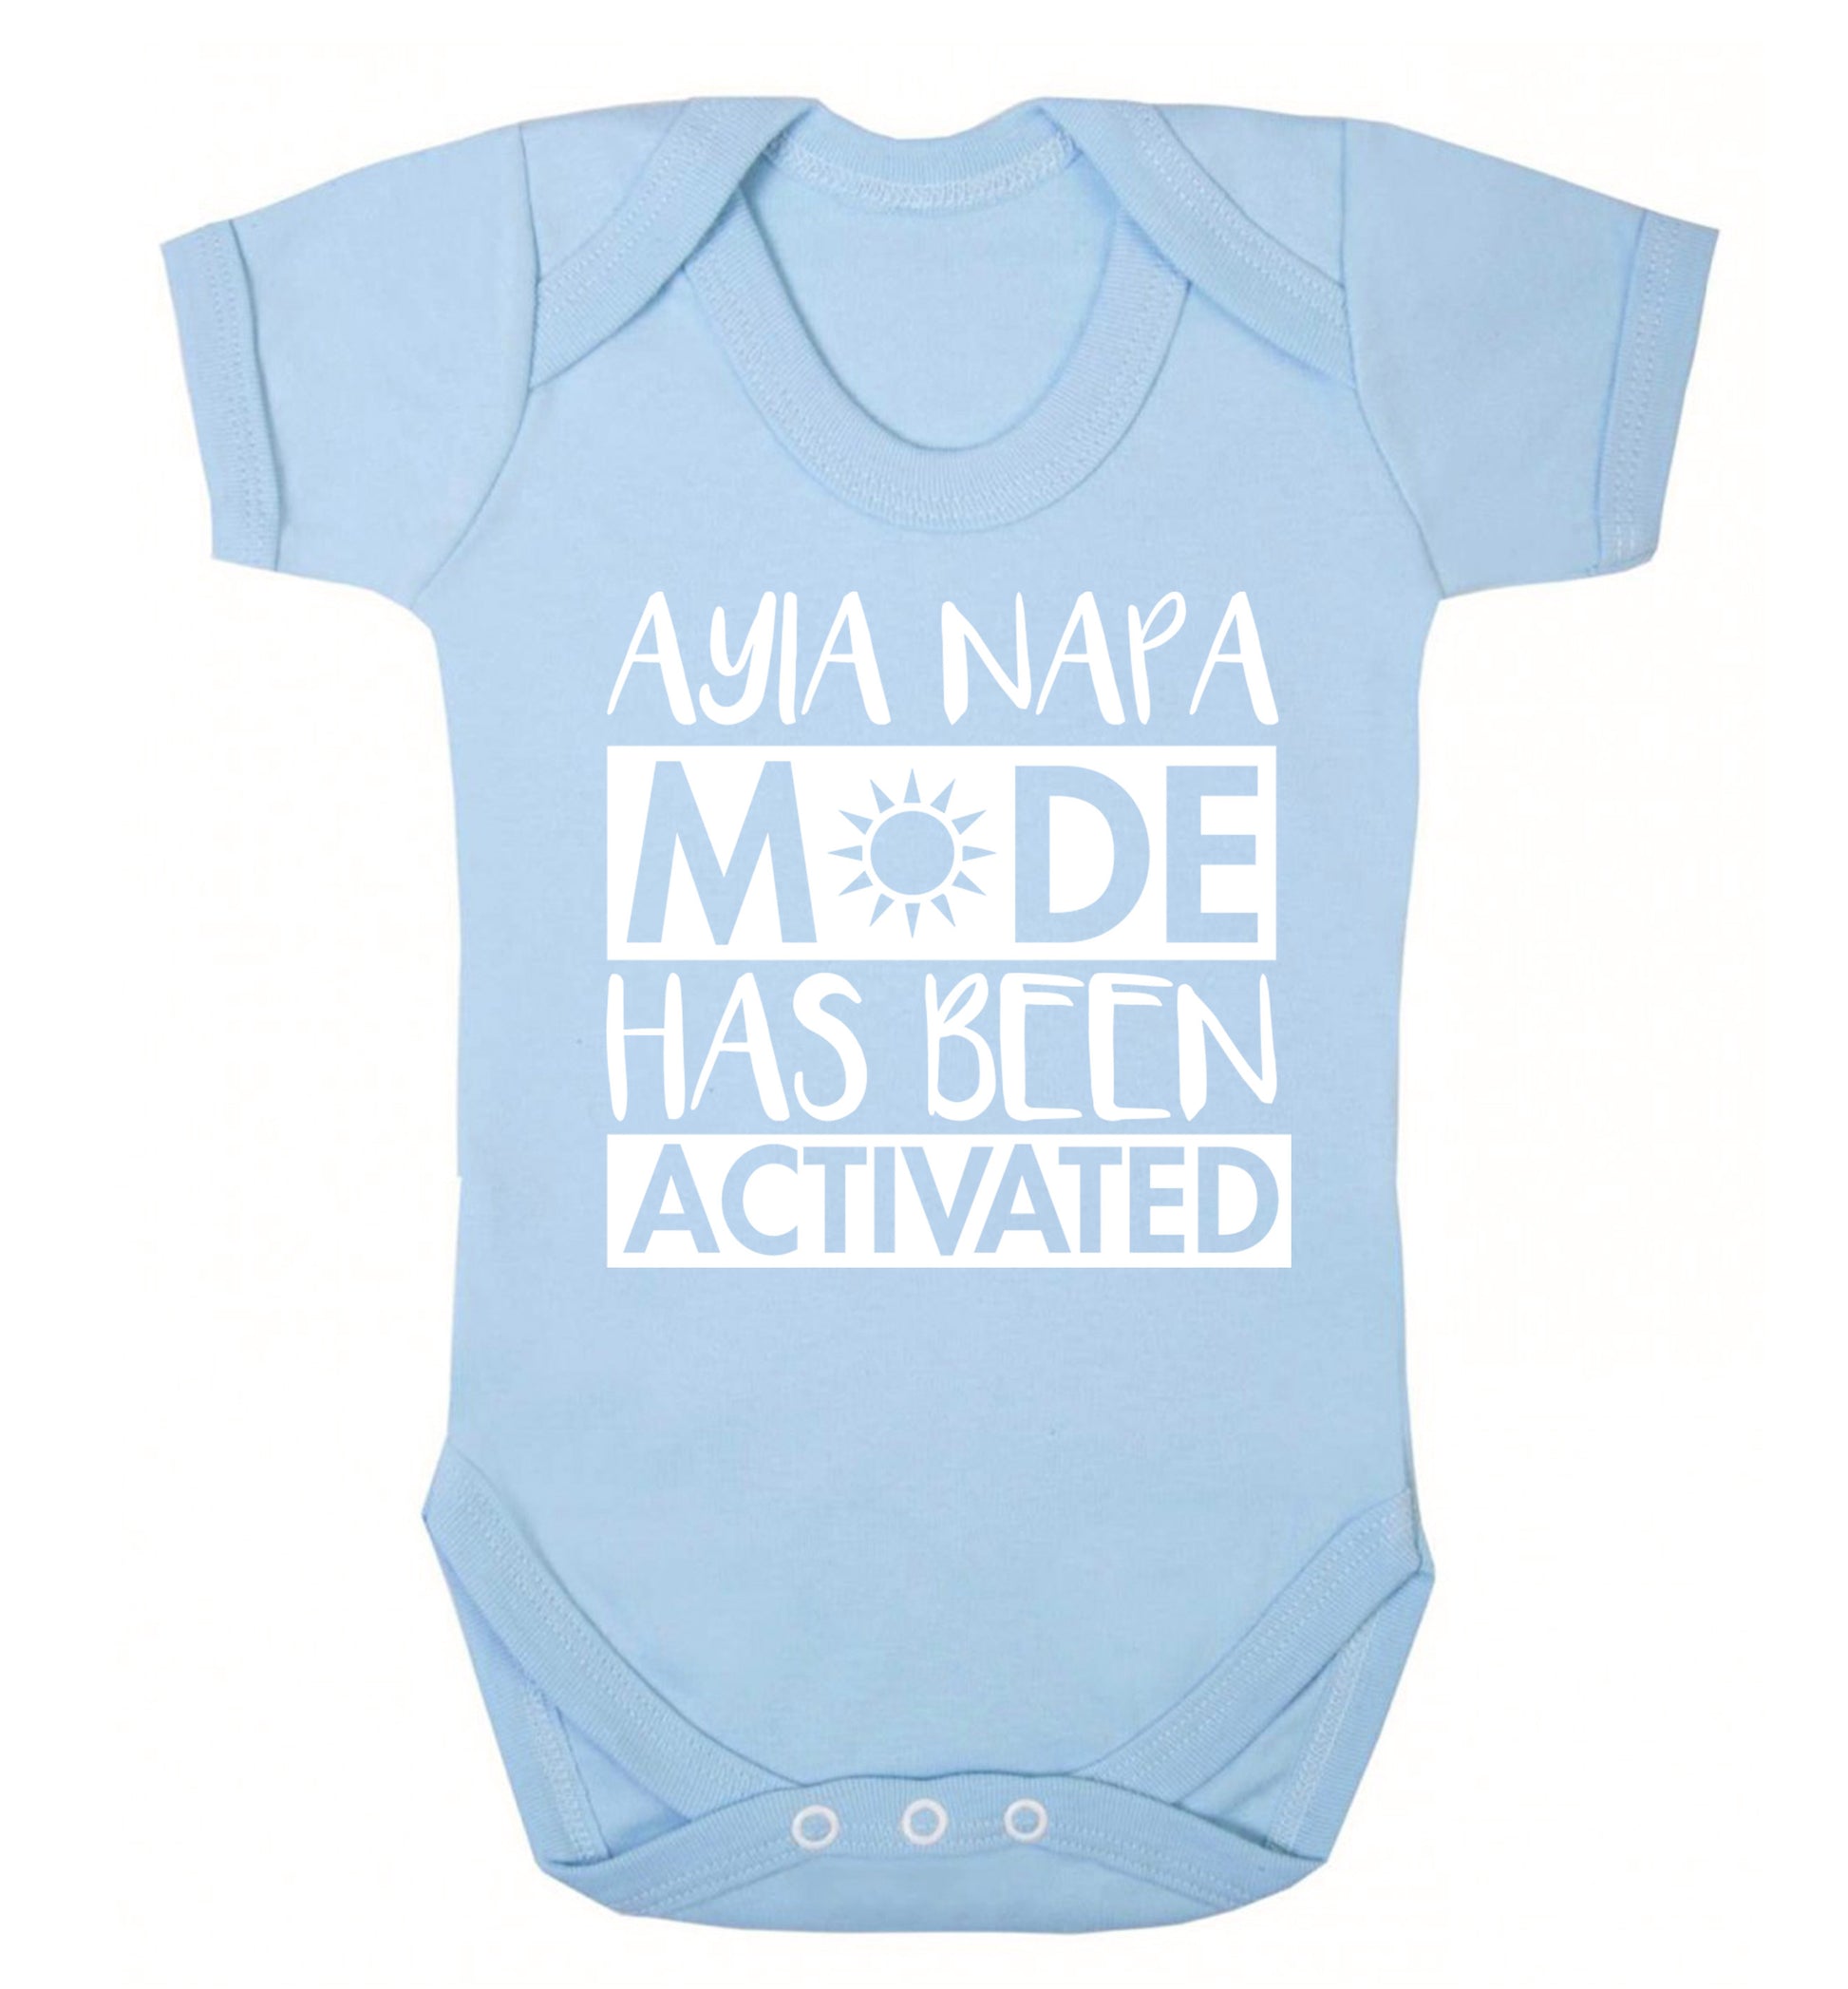 Aiya Napa mode has been activated Baby Vest pale blue 18-24 months